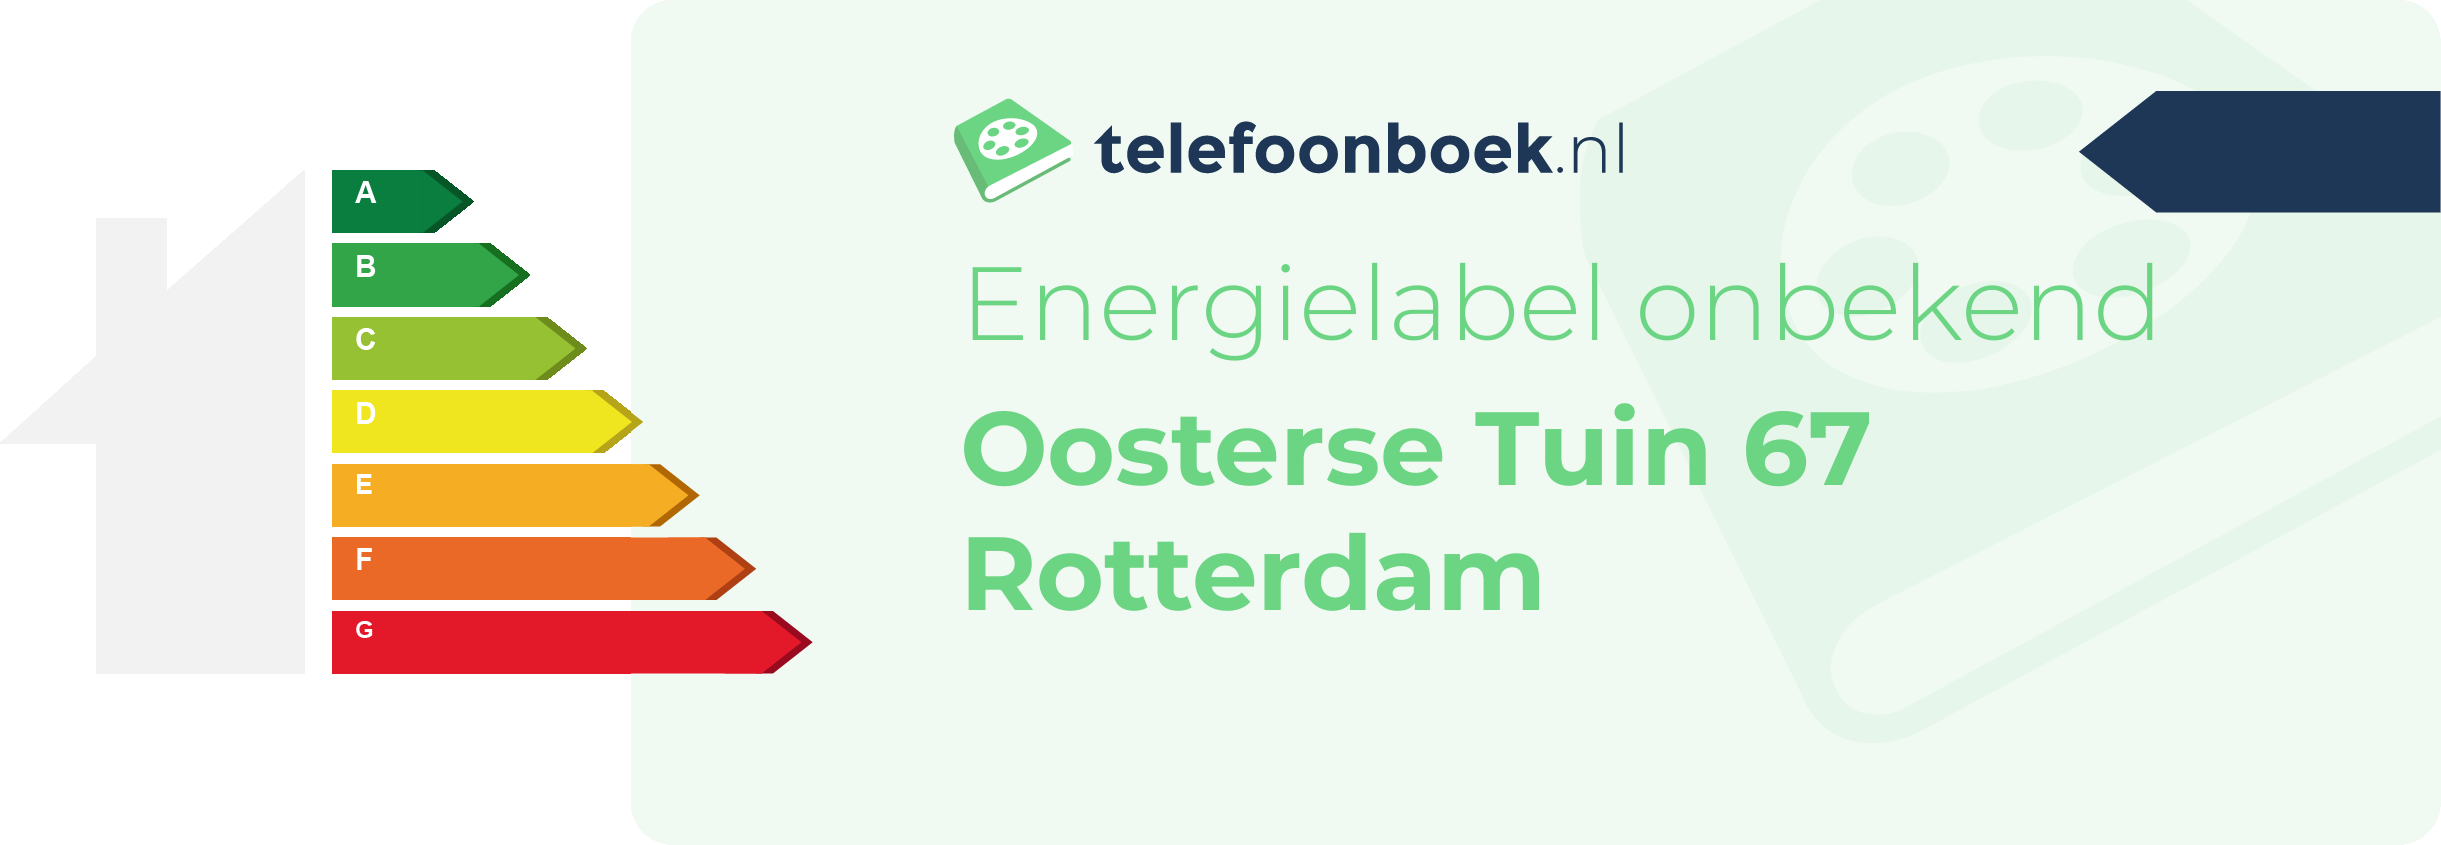 Energielabel Oosterse Tuin 67 Rotterdam